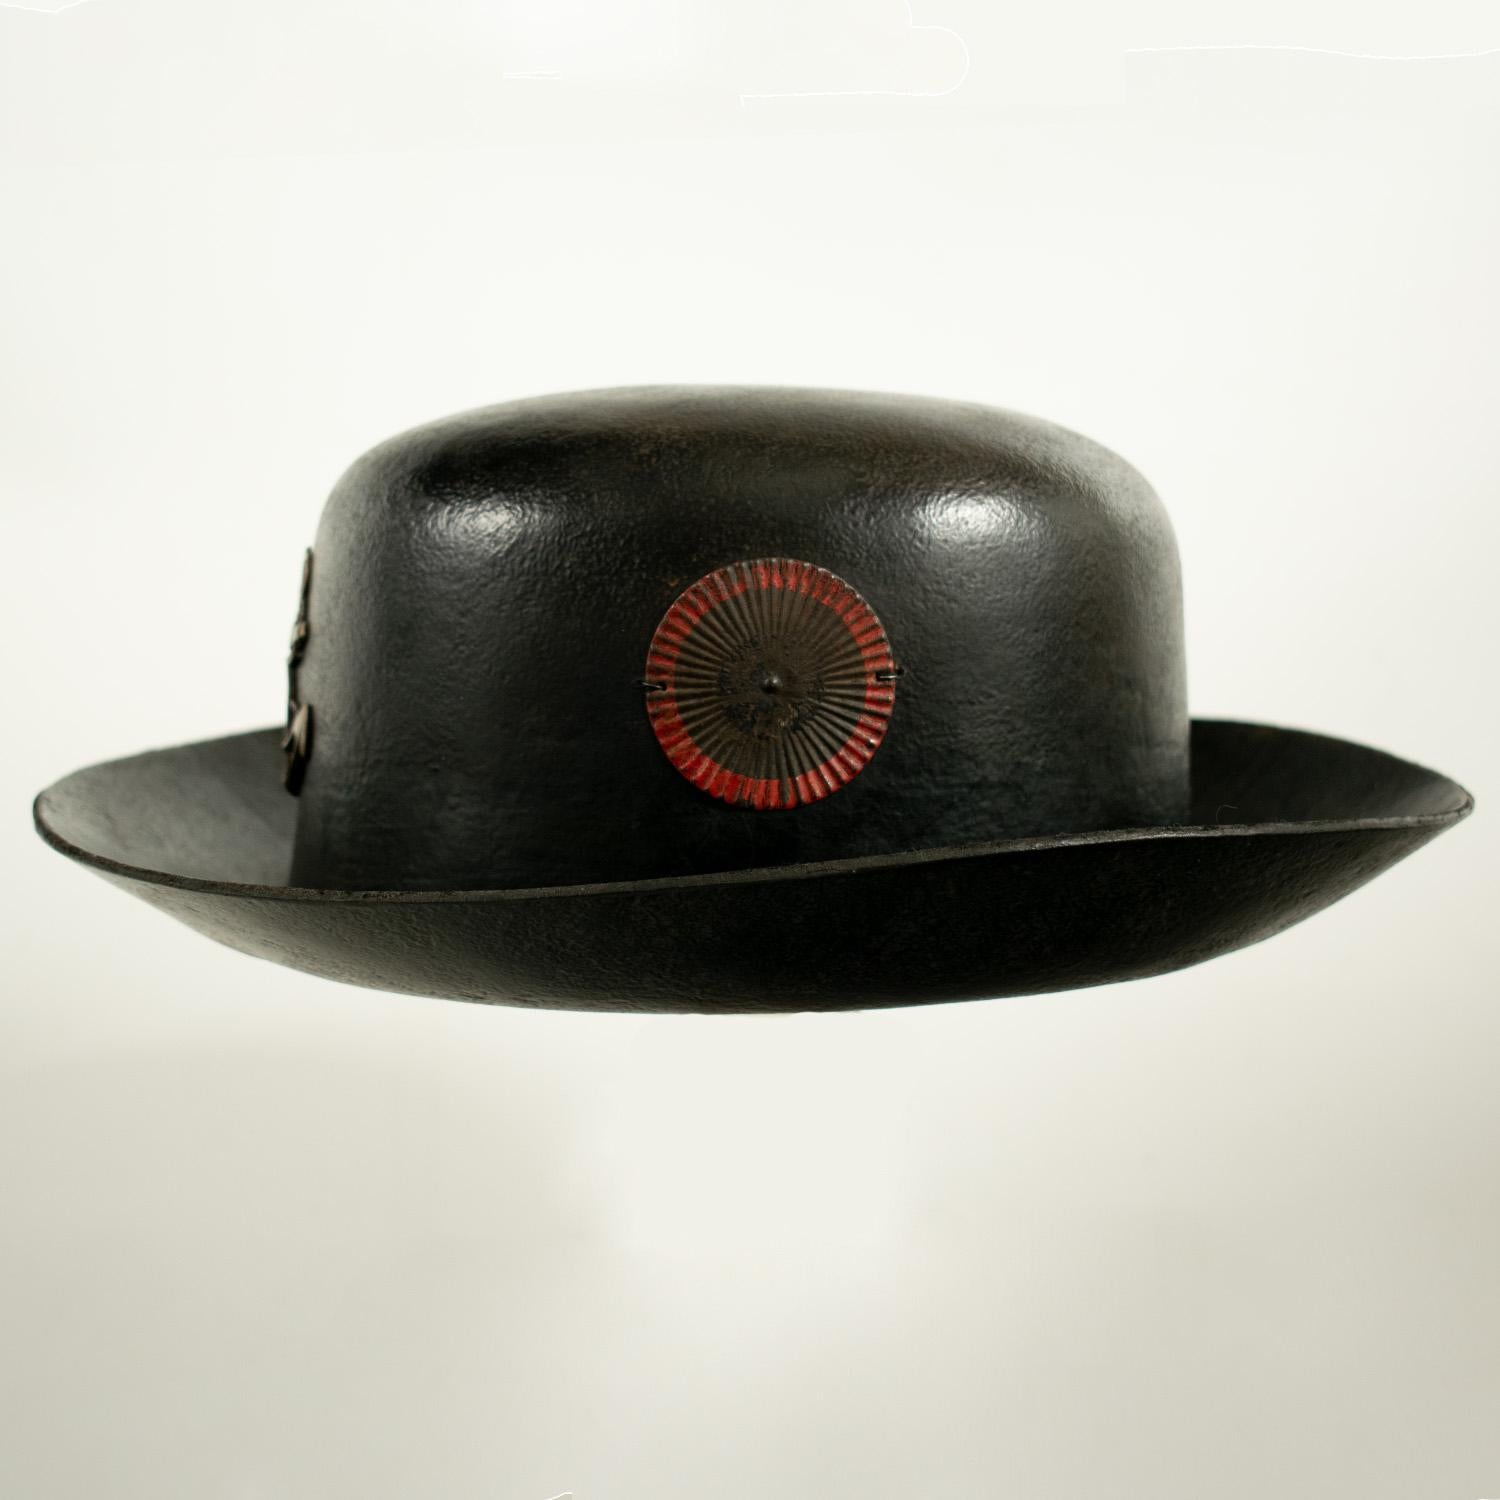 French RARE FRENCH SEAMAN'S TAR HAT - early 19th century. For Sale